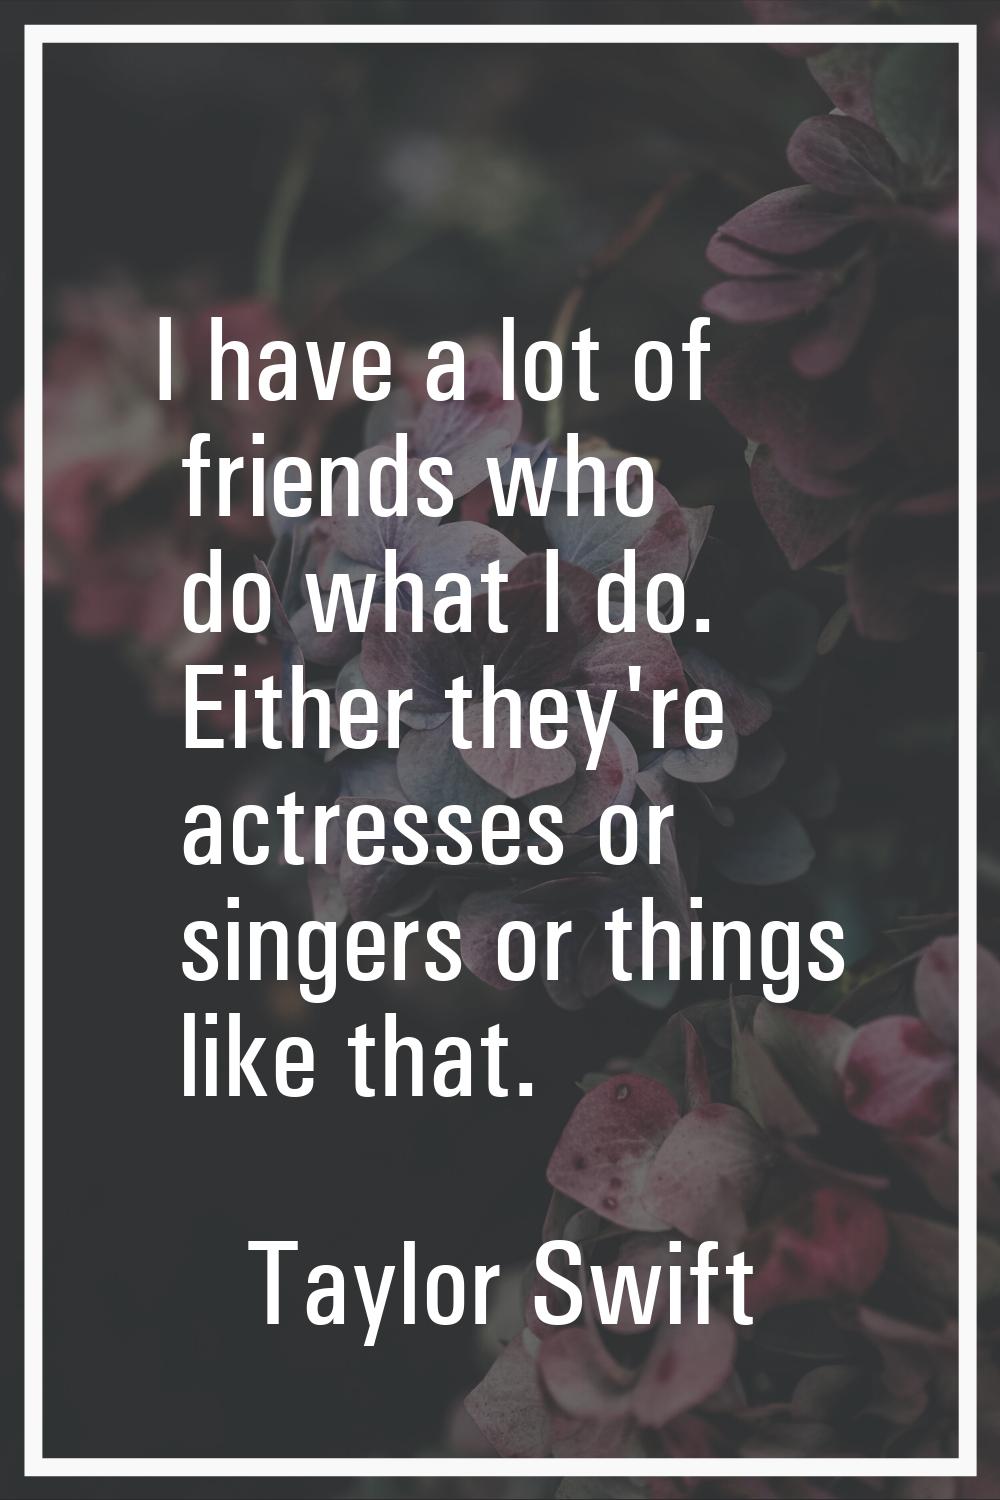 I have a lot of friends who do what I do. Either they're actresses or singers or things like that.